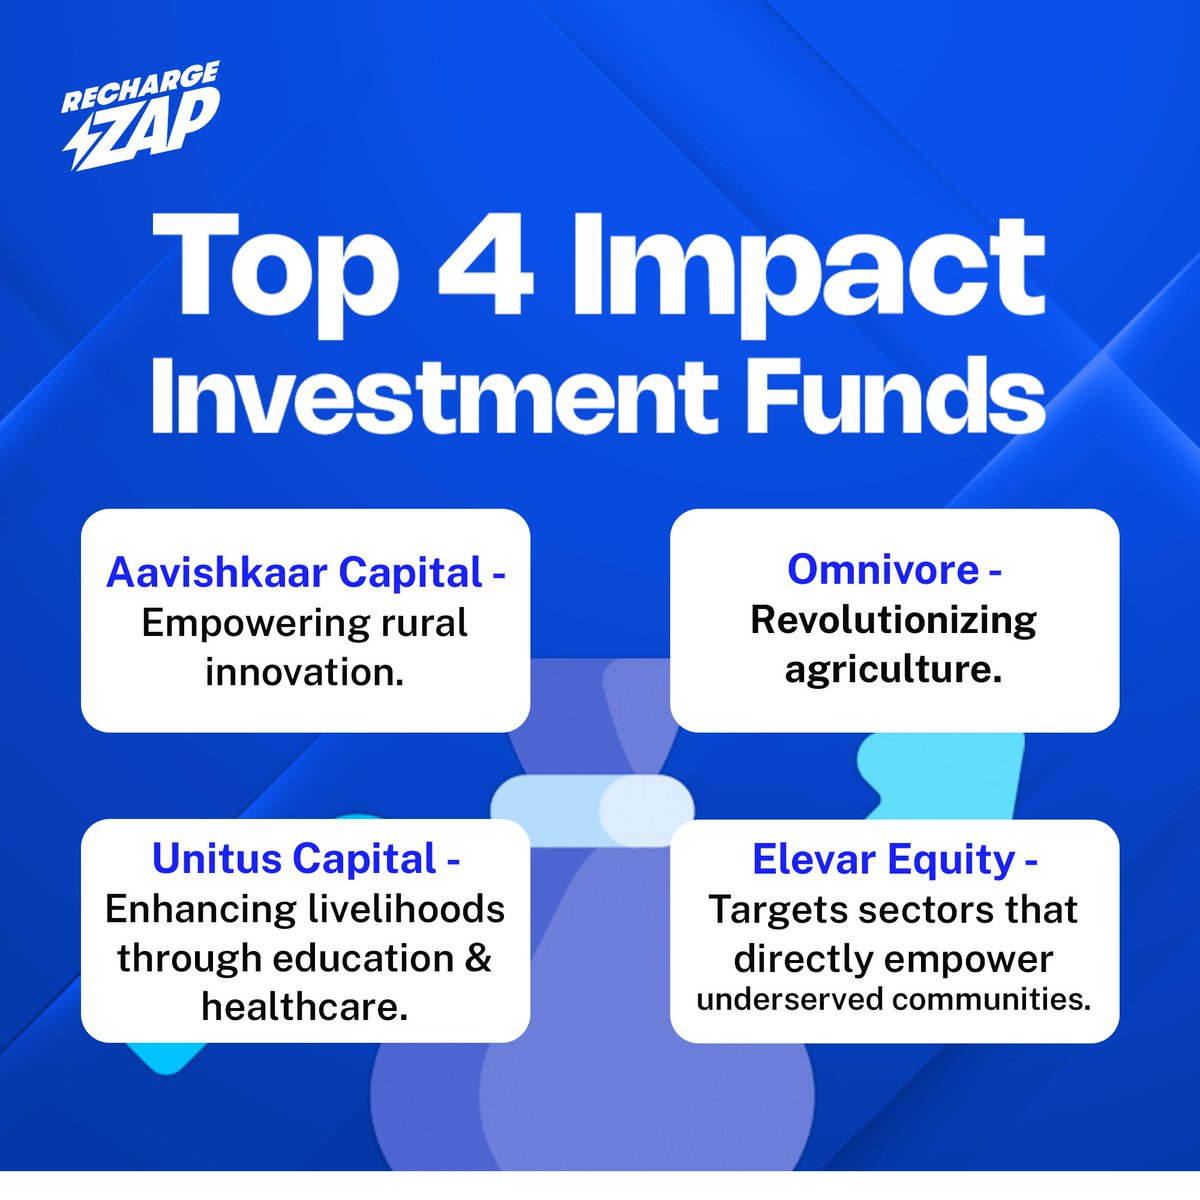 #Explore #India’s top impact investment funds: Aavishkaar for rural growth, Omnivore for agri-tech, & Unitus for education and health. Invest and impact! #ImpactInvesting #SustainableGrowth #rechargezap